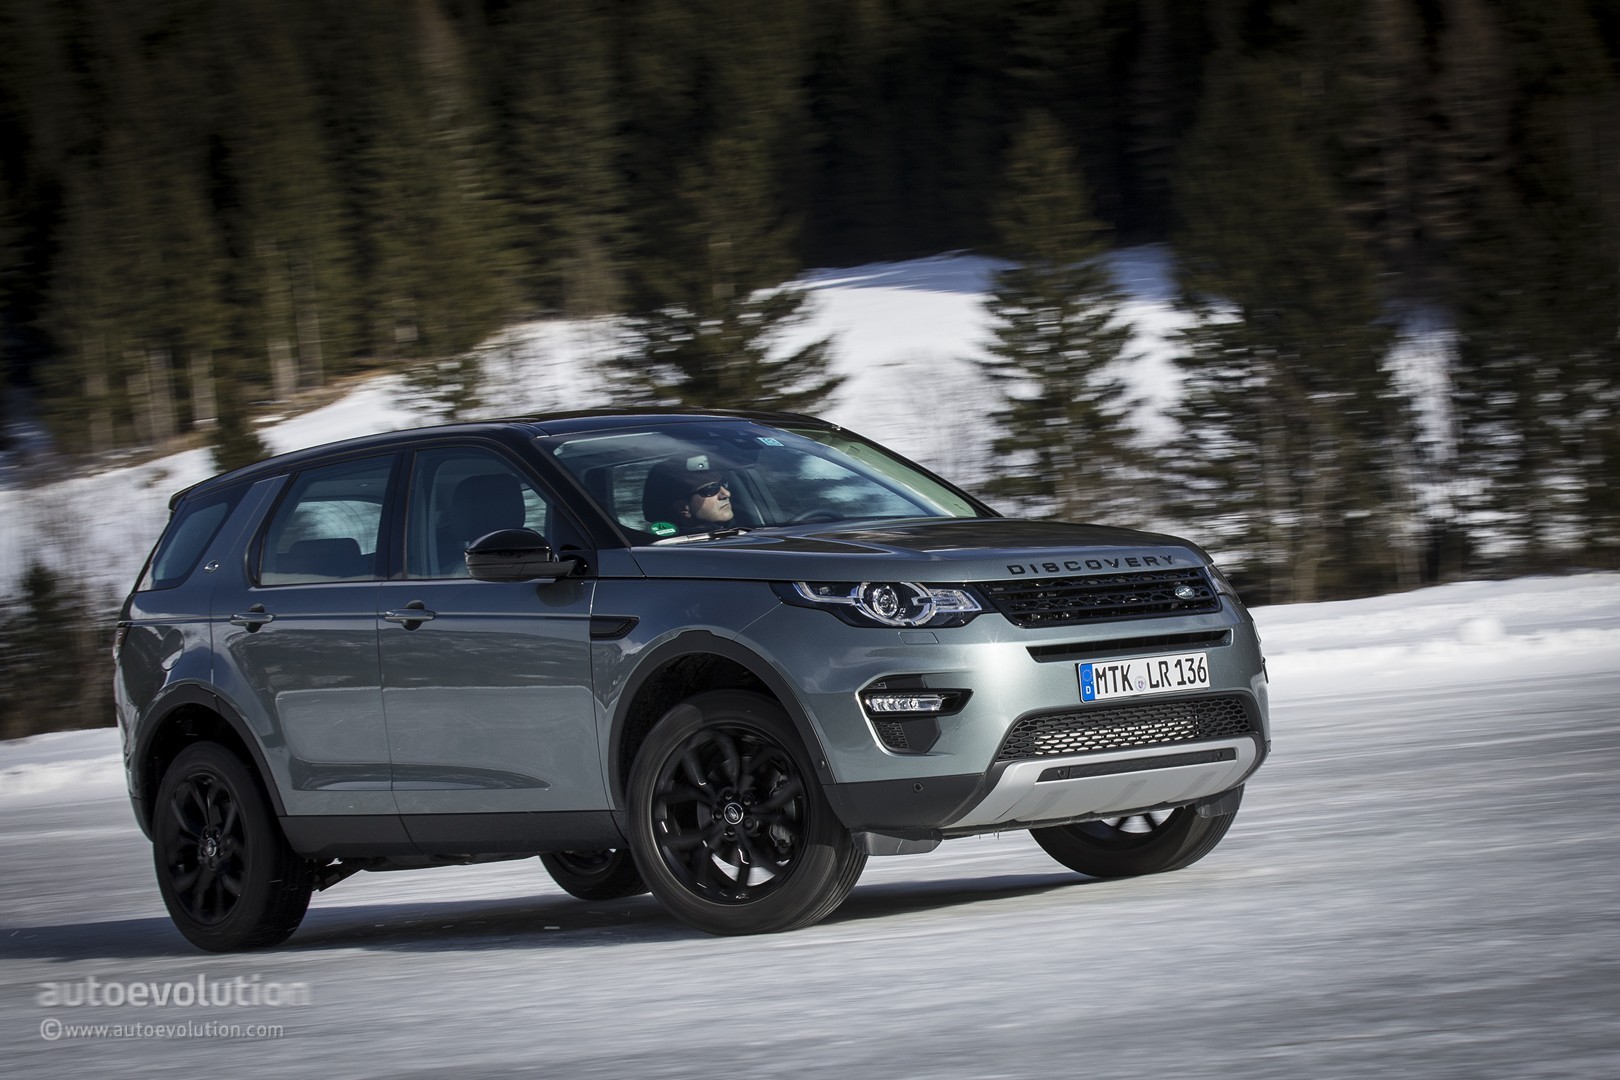 Blindages aluminium Rival pour Land Rover Discovery Sport 2015-2019